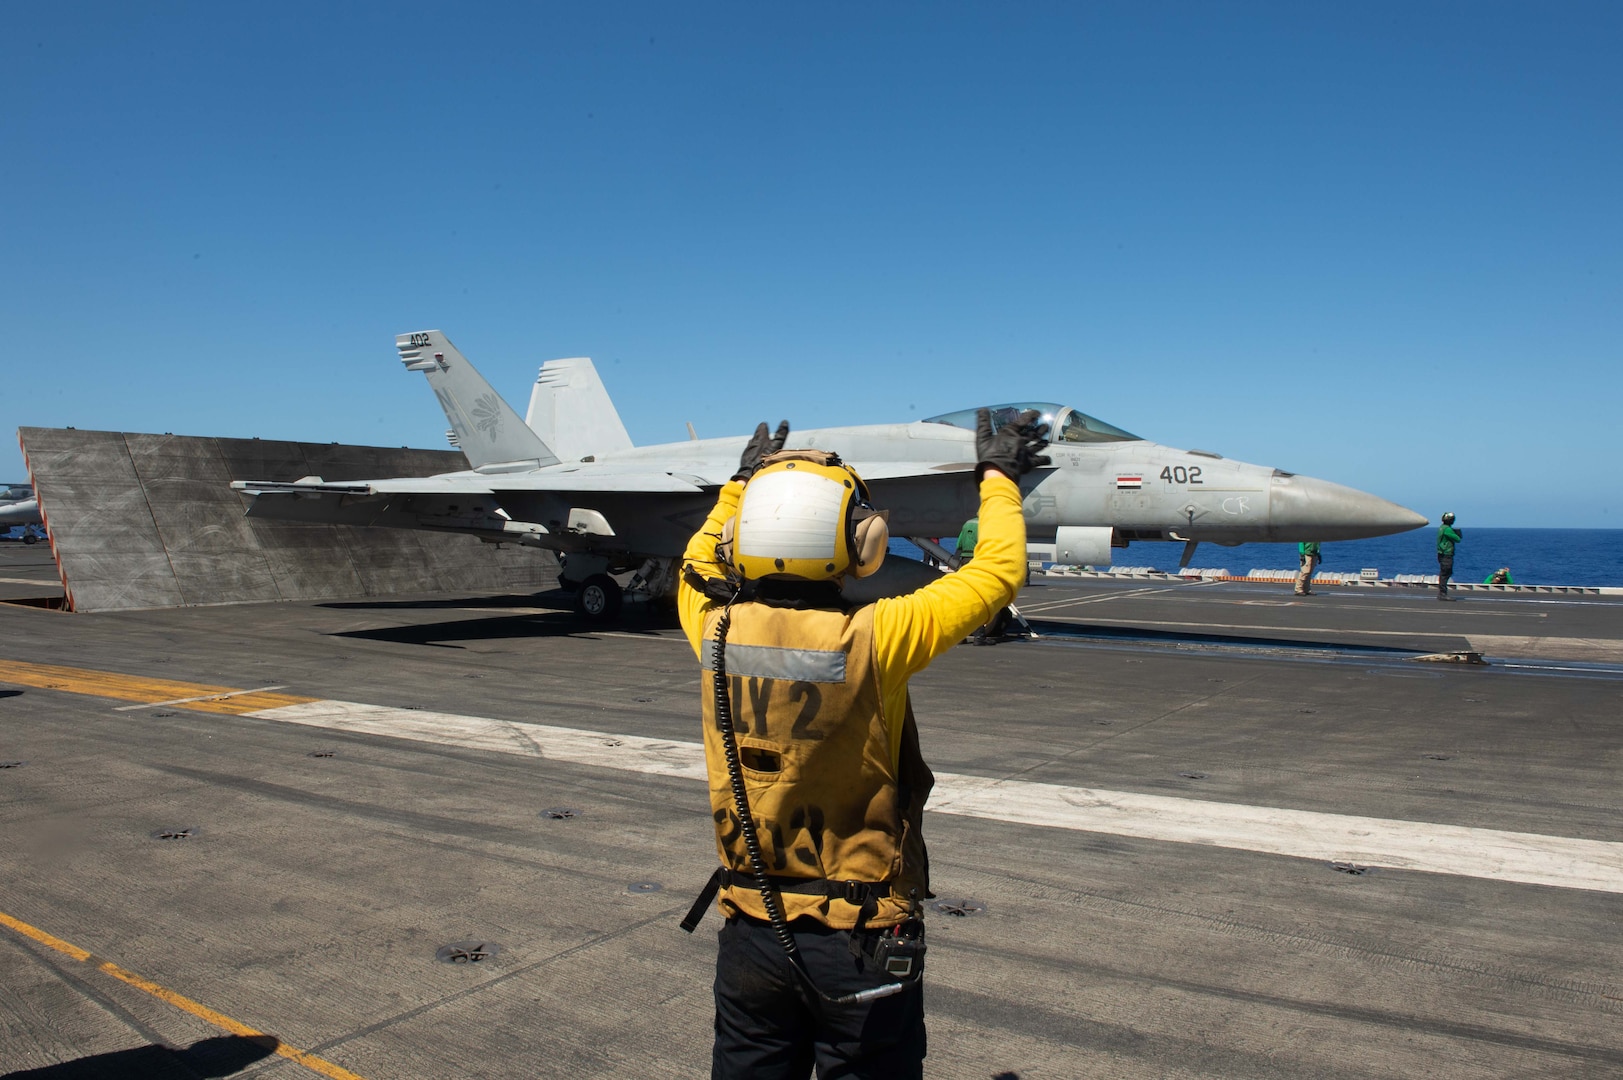 A service member directs a jet taking off from an aircraft carrier.